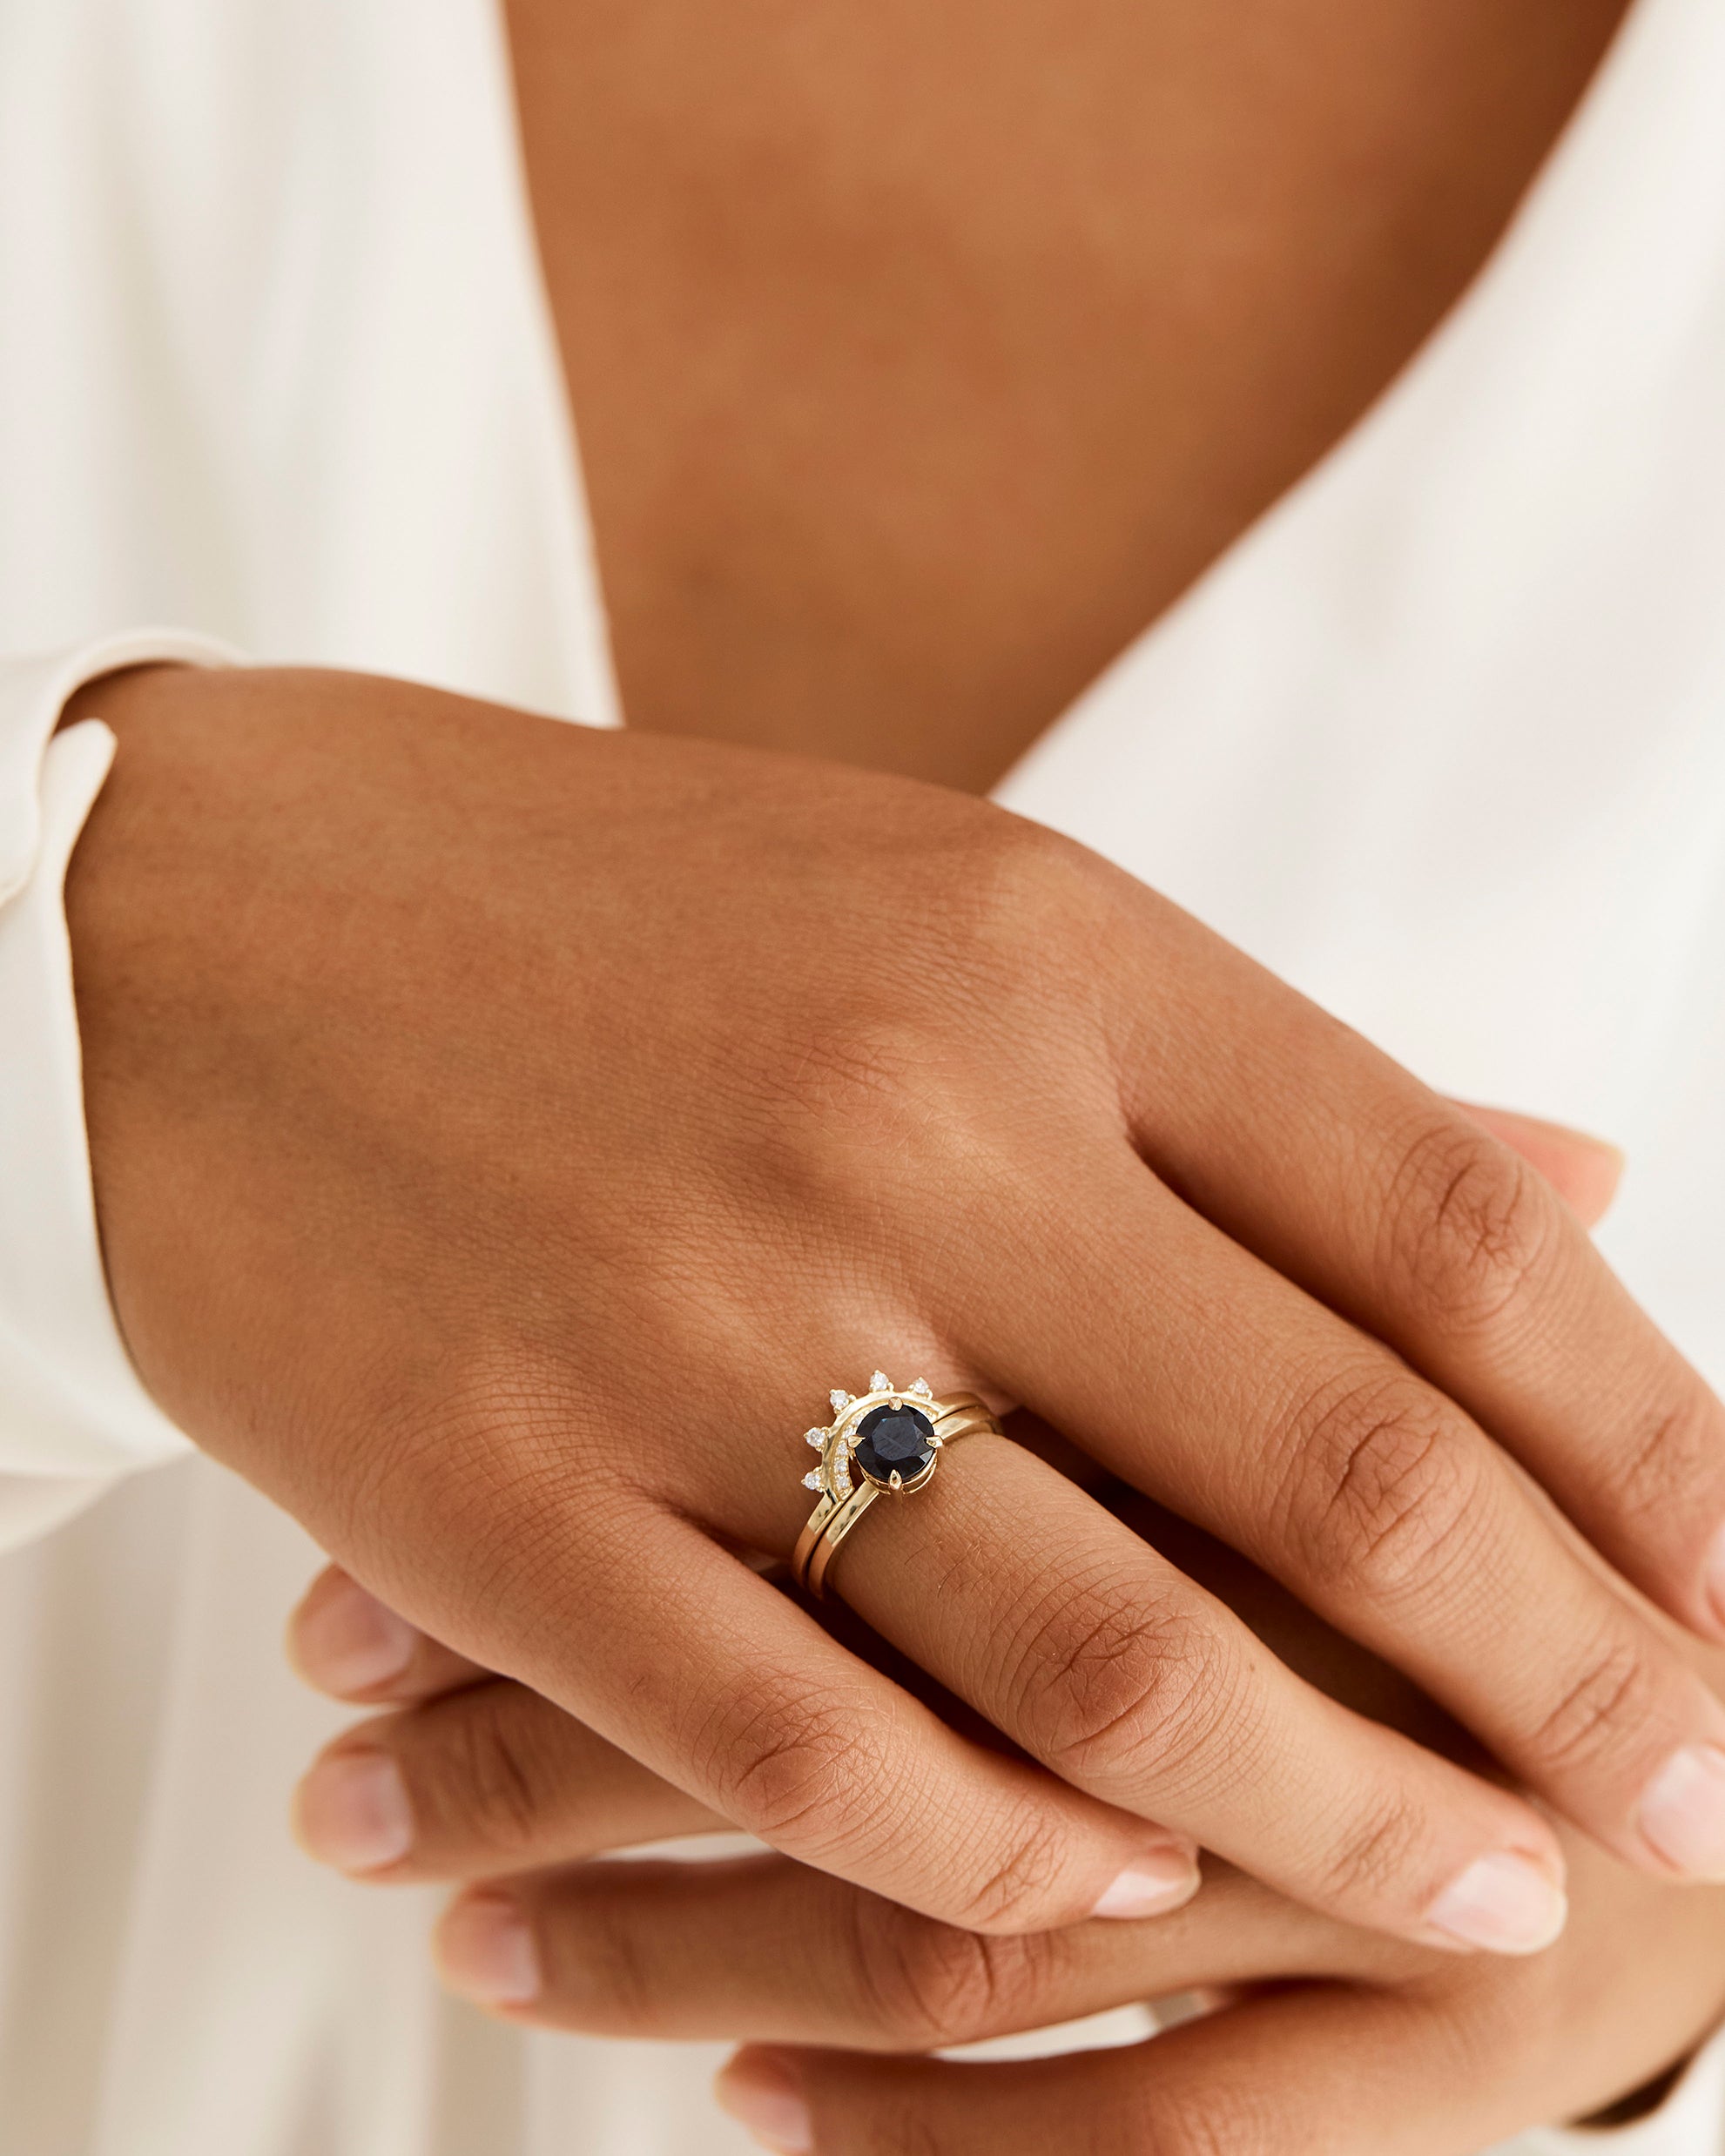 A model wears a detailed diamond crown ring stacked with a solitaire style engagement ring